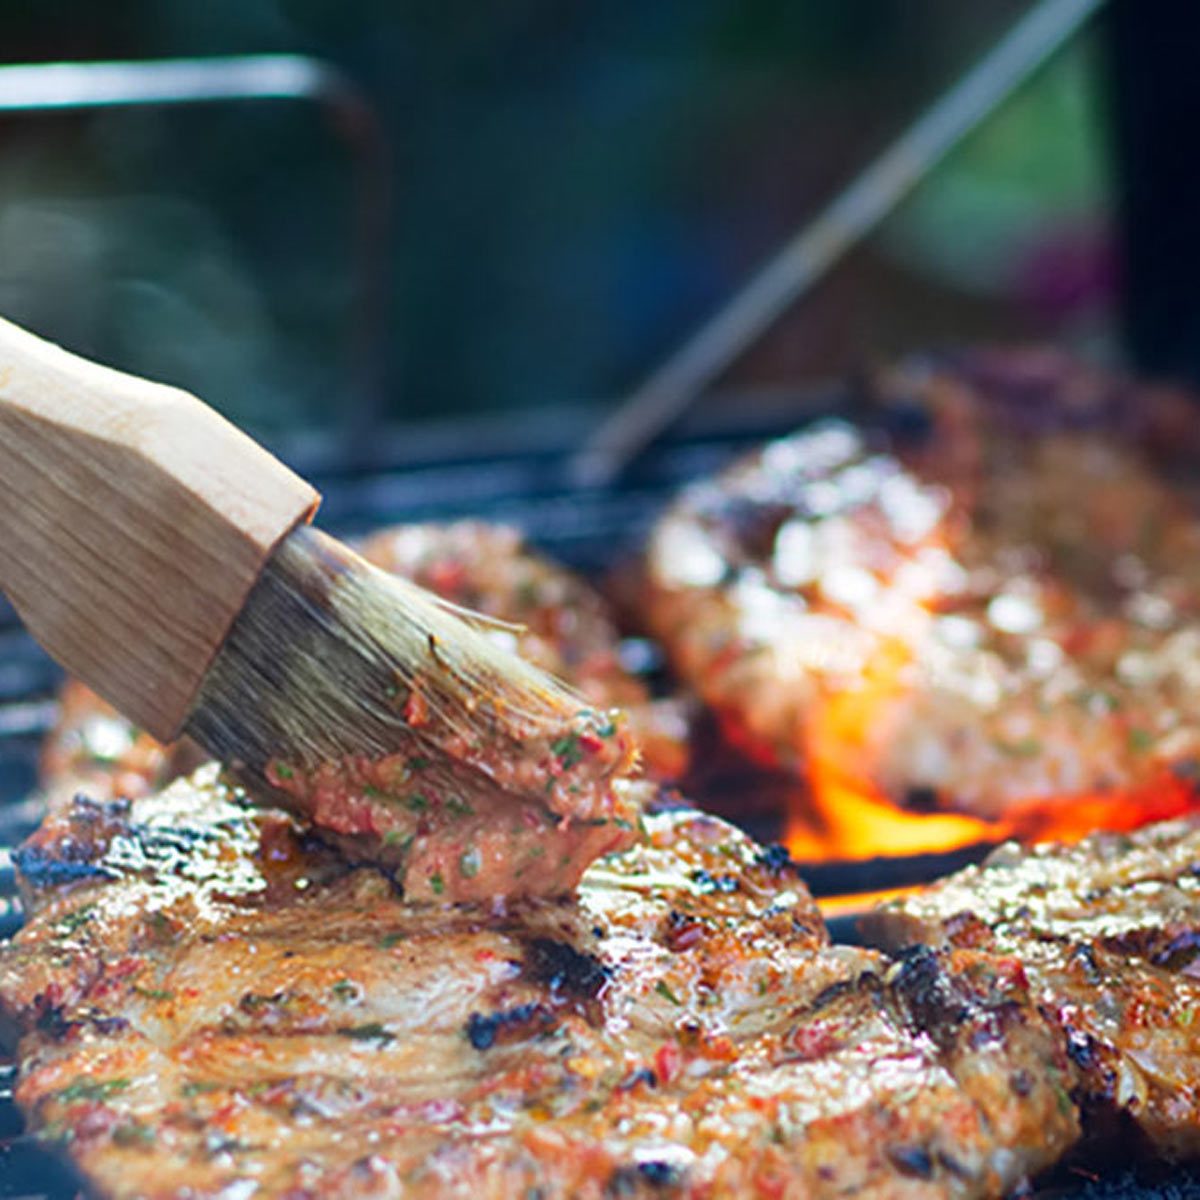 Battle of the BBQ: Charcoal vs. Gas Grill